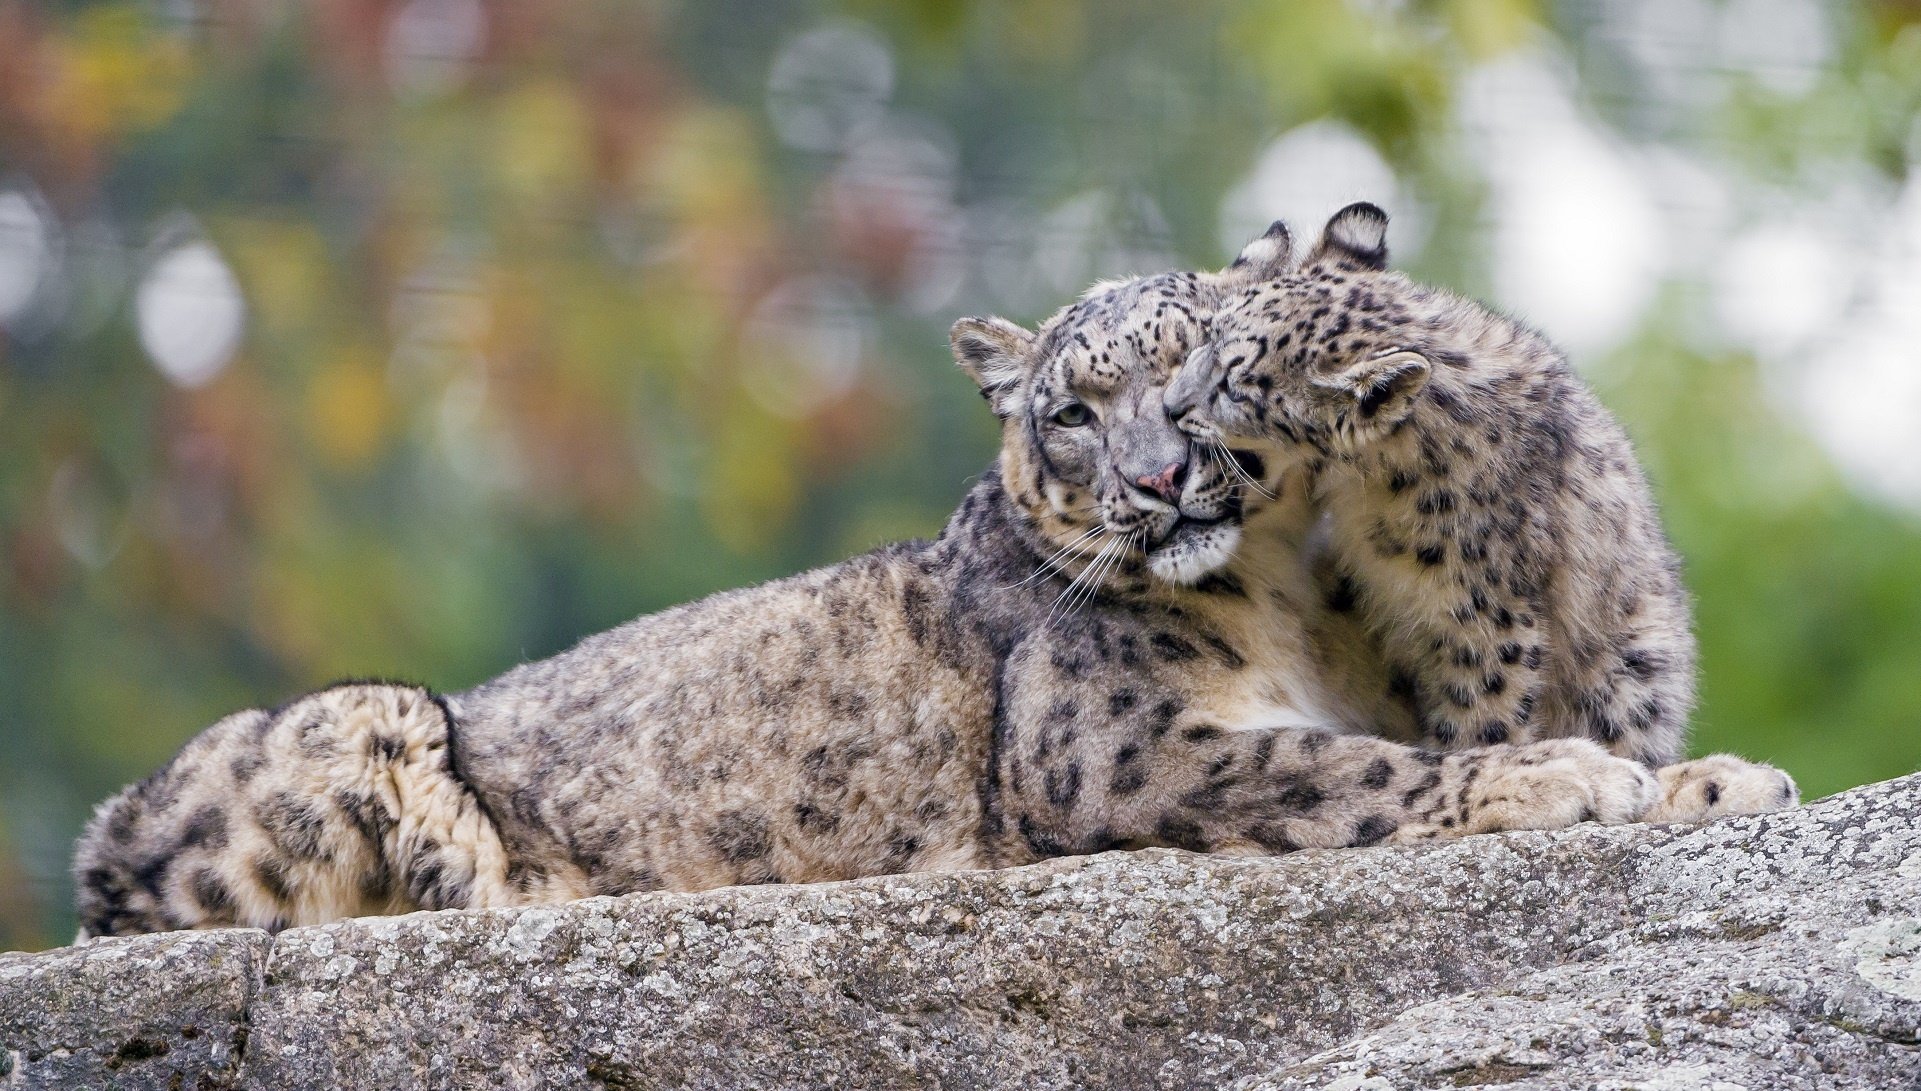 snow, Leopard, Wild, Cat, Predator, Couple, Family, Mother, Cub, Motherhood, Kindness, Caring, Game, Zoo Wallpaper